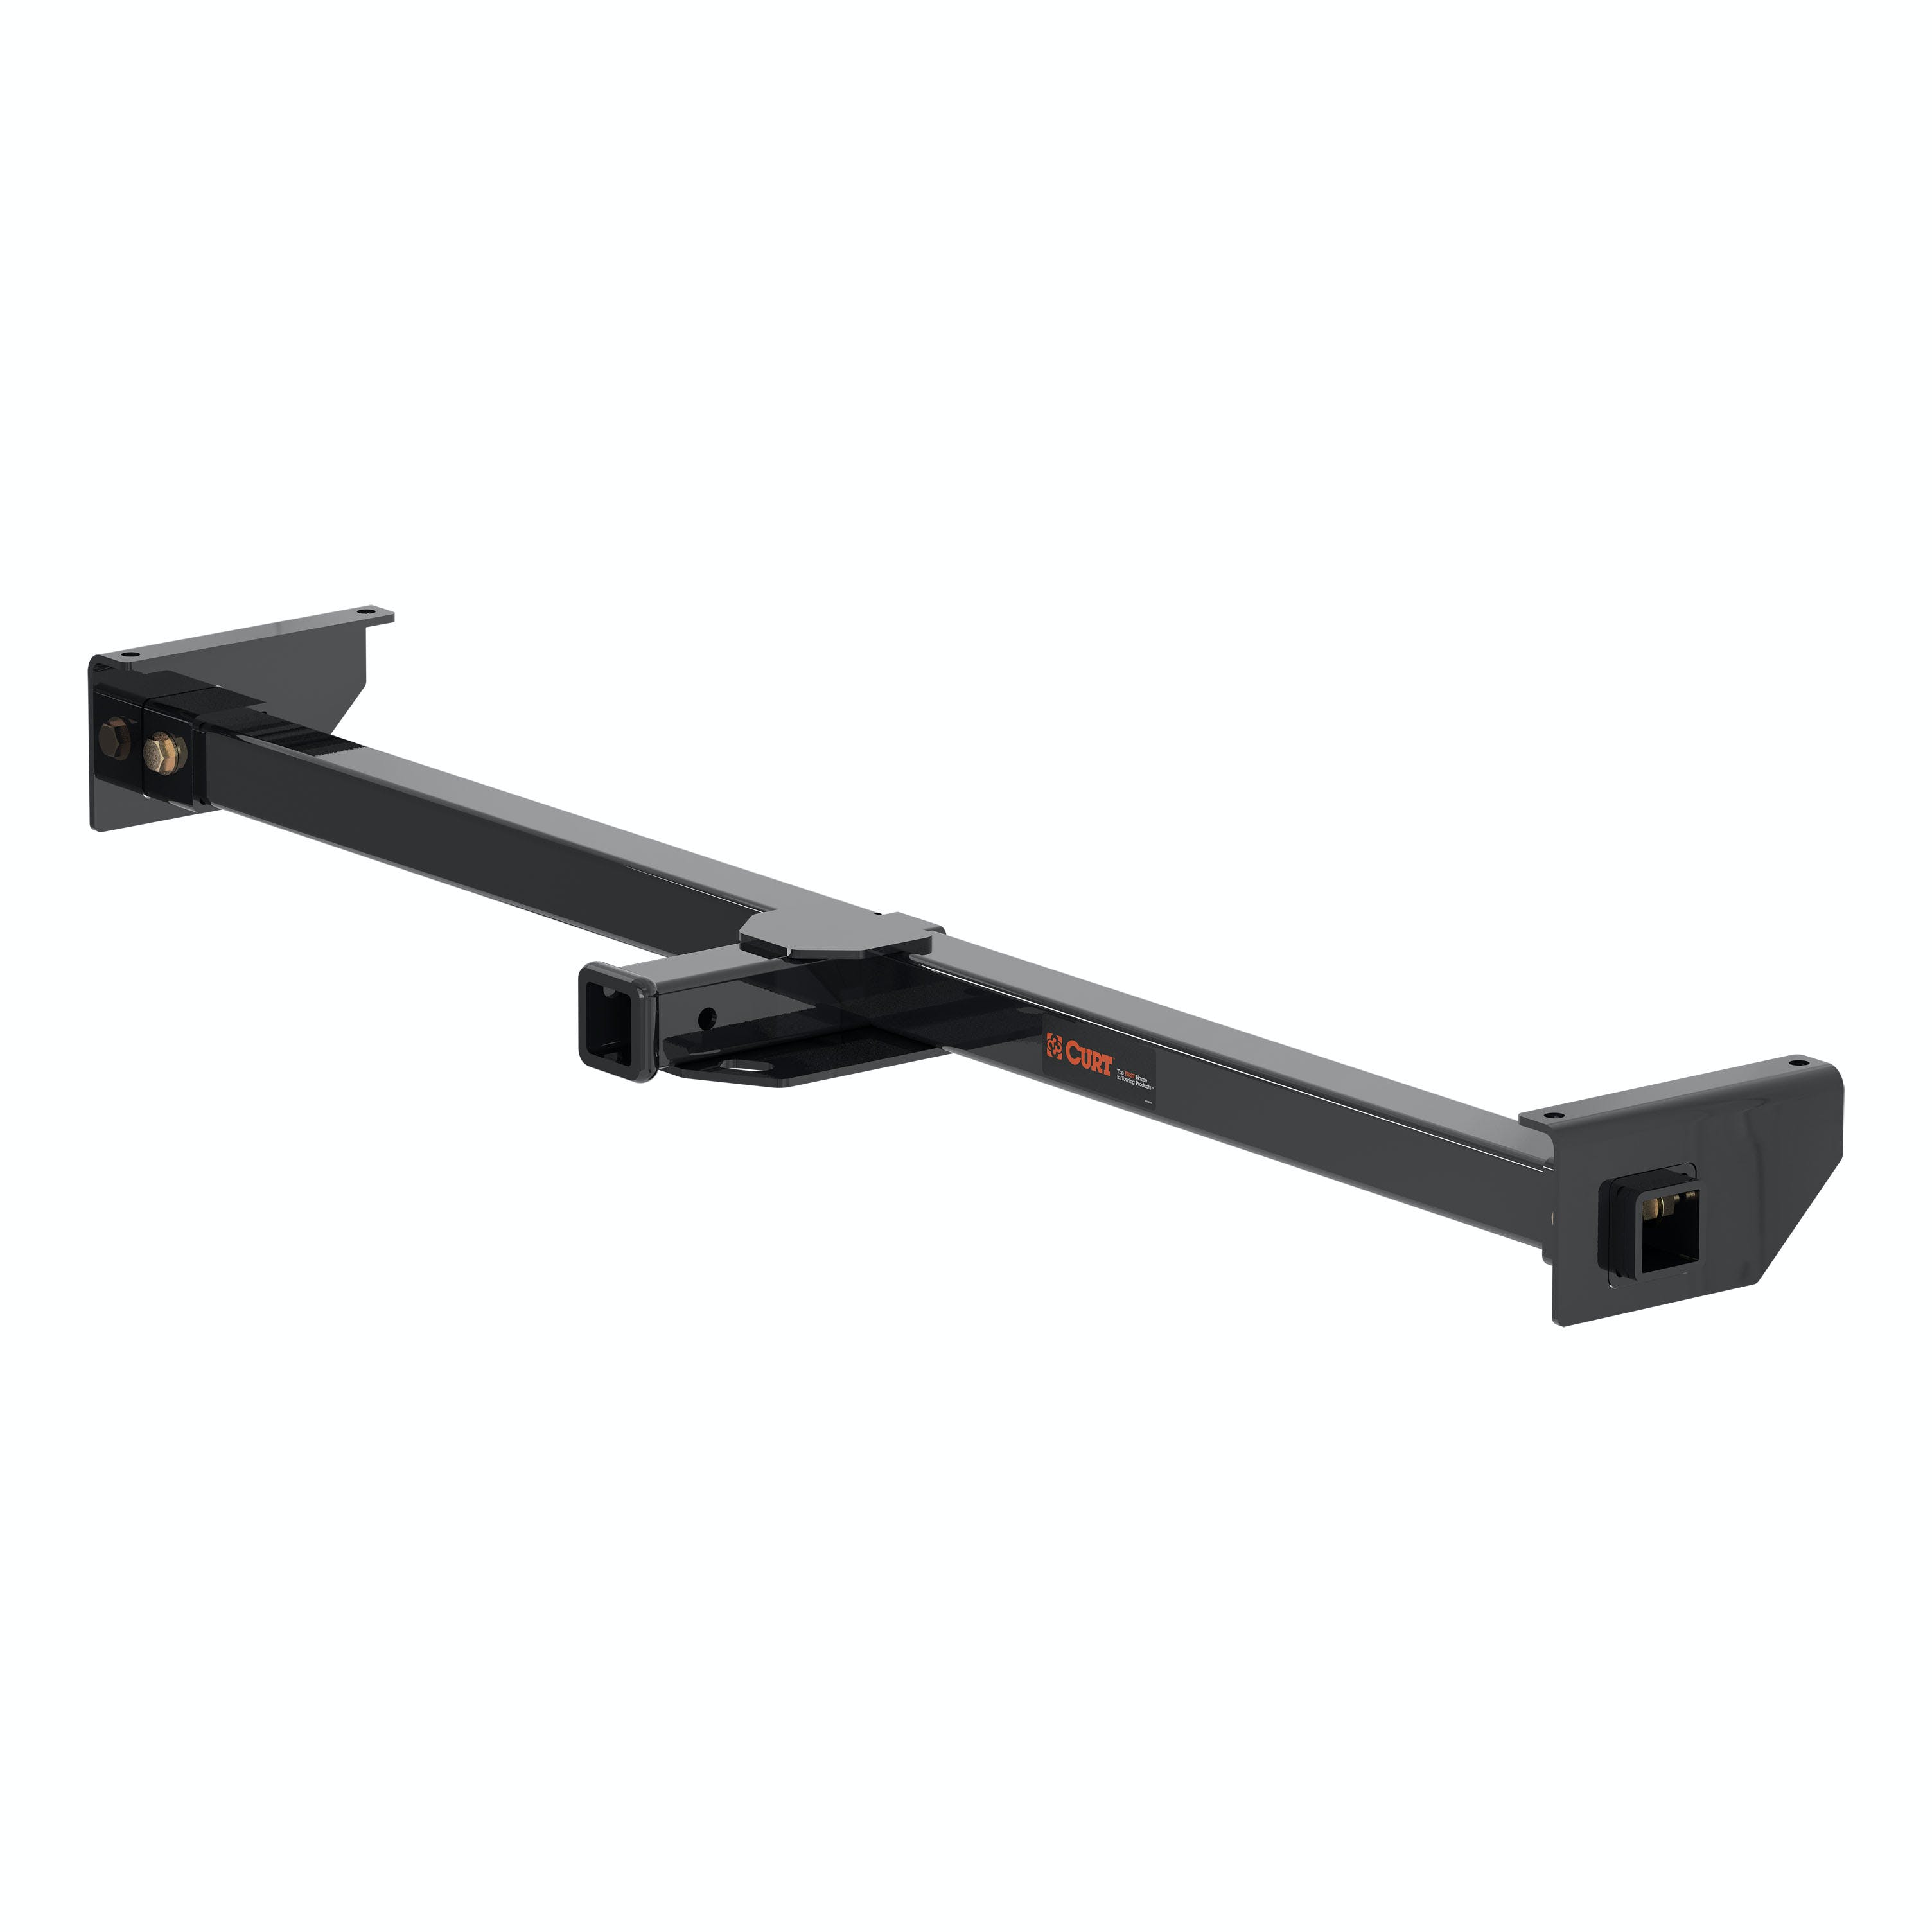 CURT 13704 Adjustable RV Trailer Hitch 2 Receiver (Up to 66 Frames)